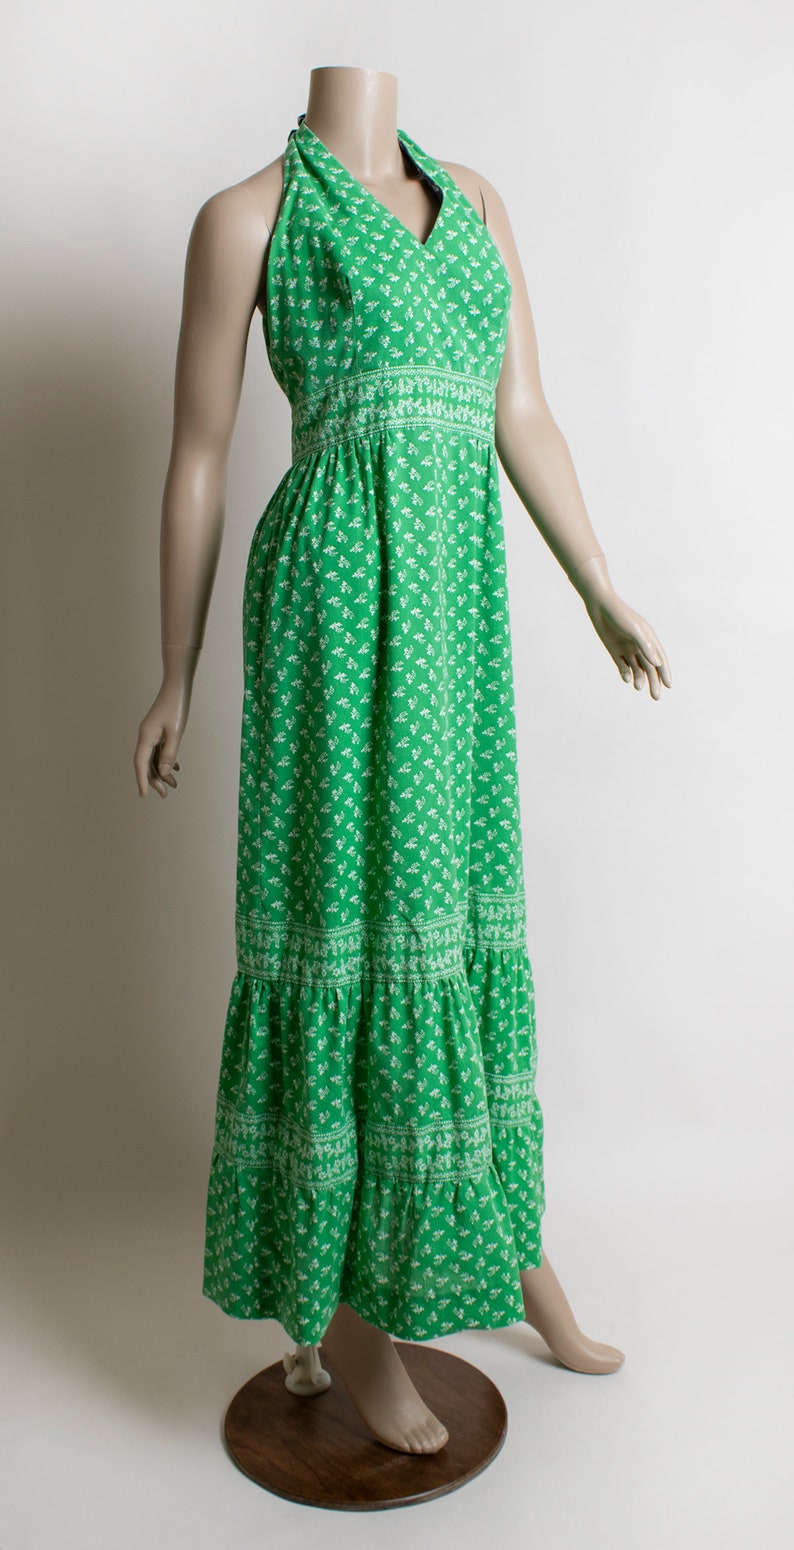 Vintage 1970s Maxi Dress Bright Kelly Green Floral Print Halter Floor Length Maxi Cotton Day Dress Prairie Style Small image 2